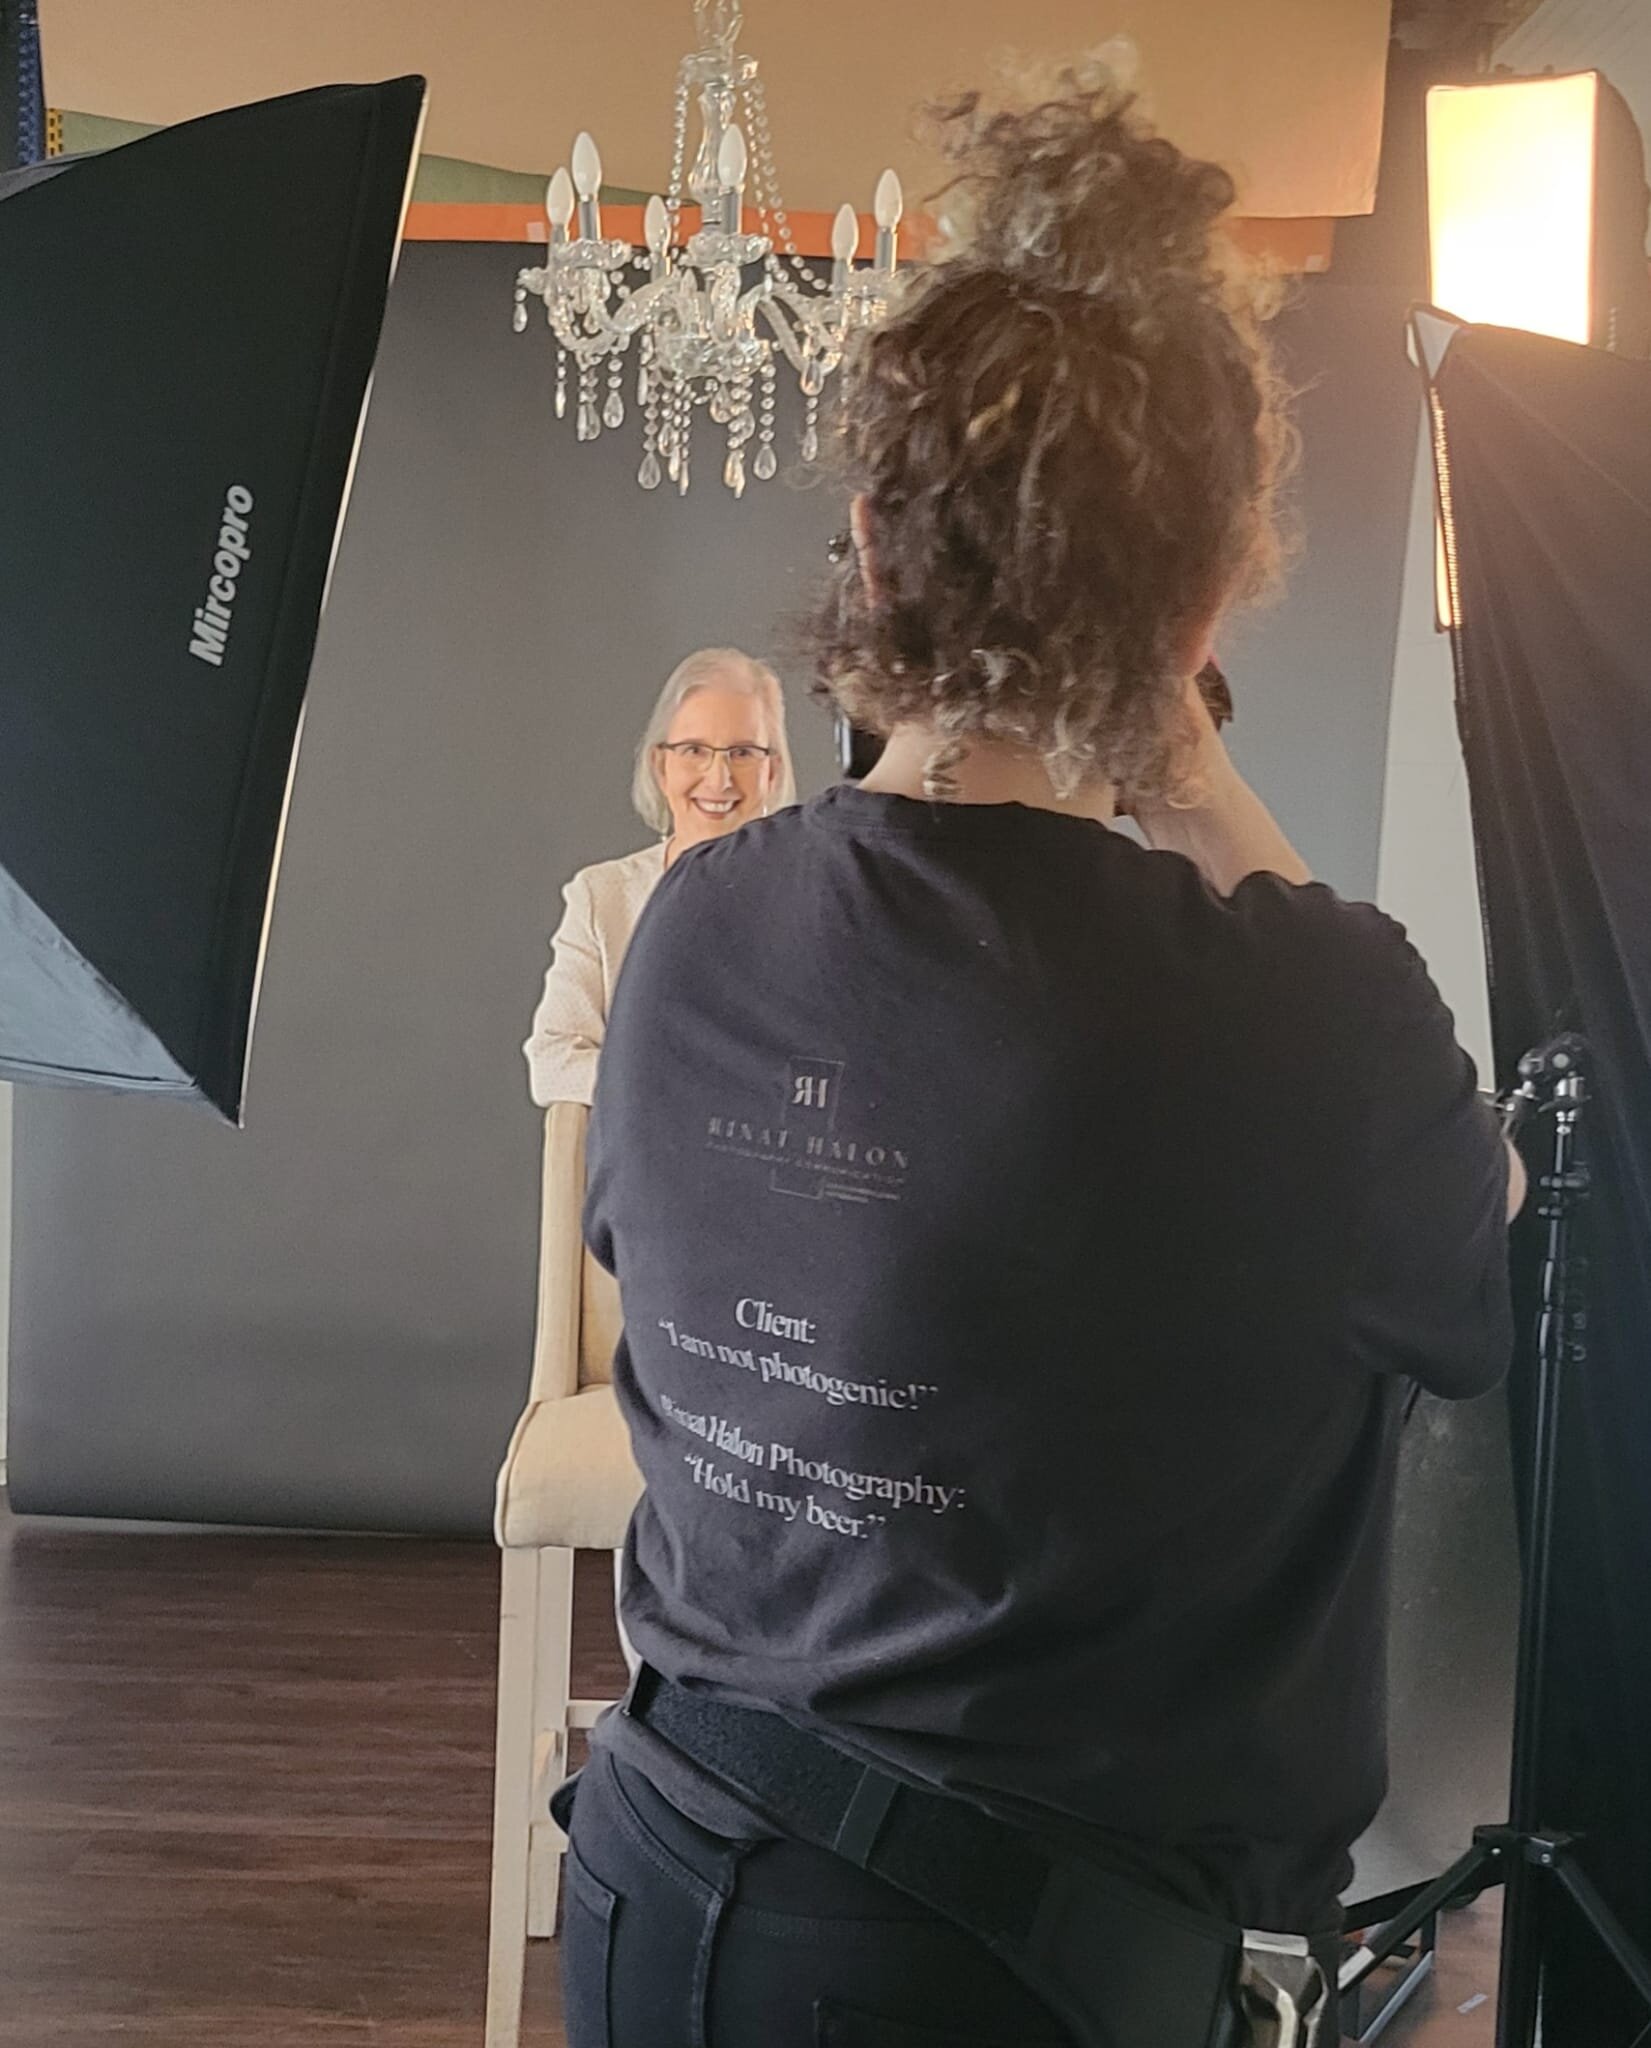 Great headshot mini day this Friday 📸💗📸💗📸💗
We were so busy we forgot to take behind the scene pics, except this lovely one of Marilyn Singer smiling like a pro 🥰
Isn't she lovely? Wait till you see her new headshots! 🤯
Shabbat Shalom world! ?